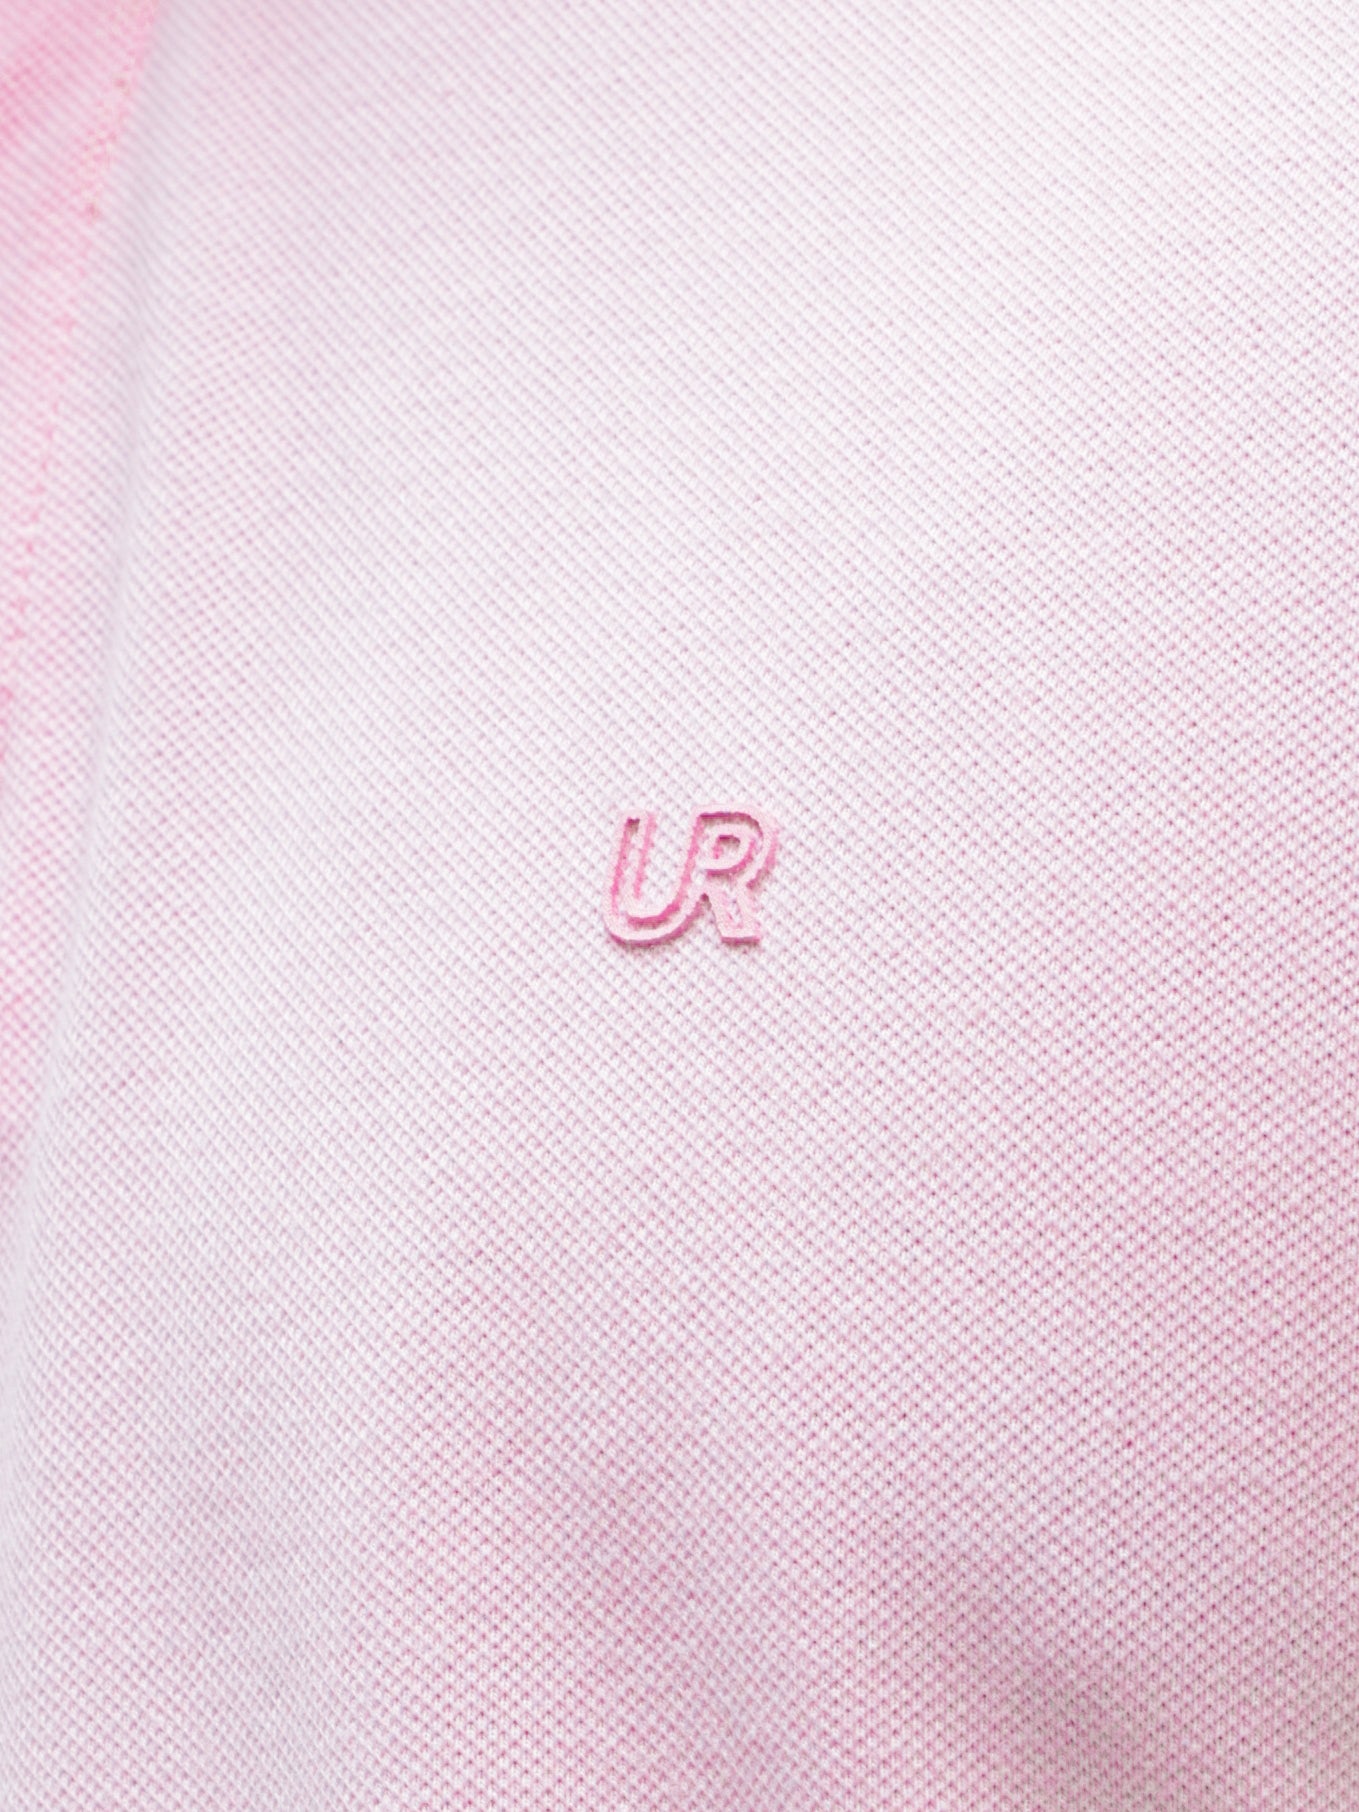 Light pink Turms Polo t-shirt close-up showing the "UR" logo embroidery, featuring premium cotton and spandex fabric with anti-stain and anti-odor properties.